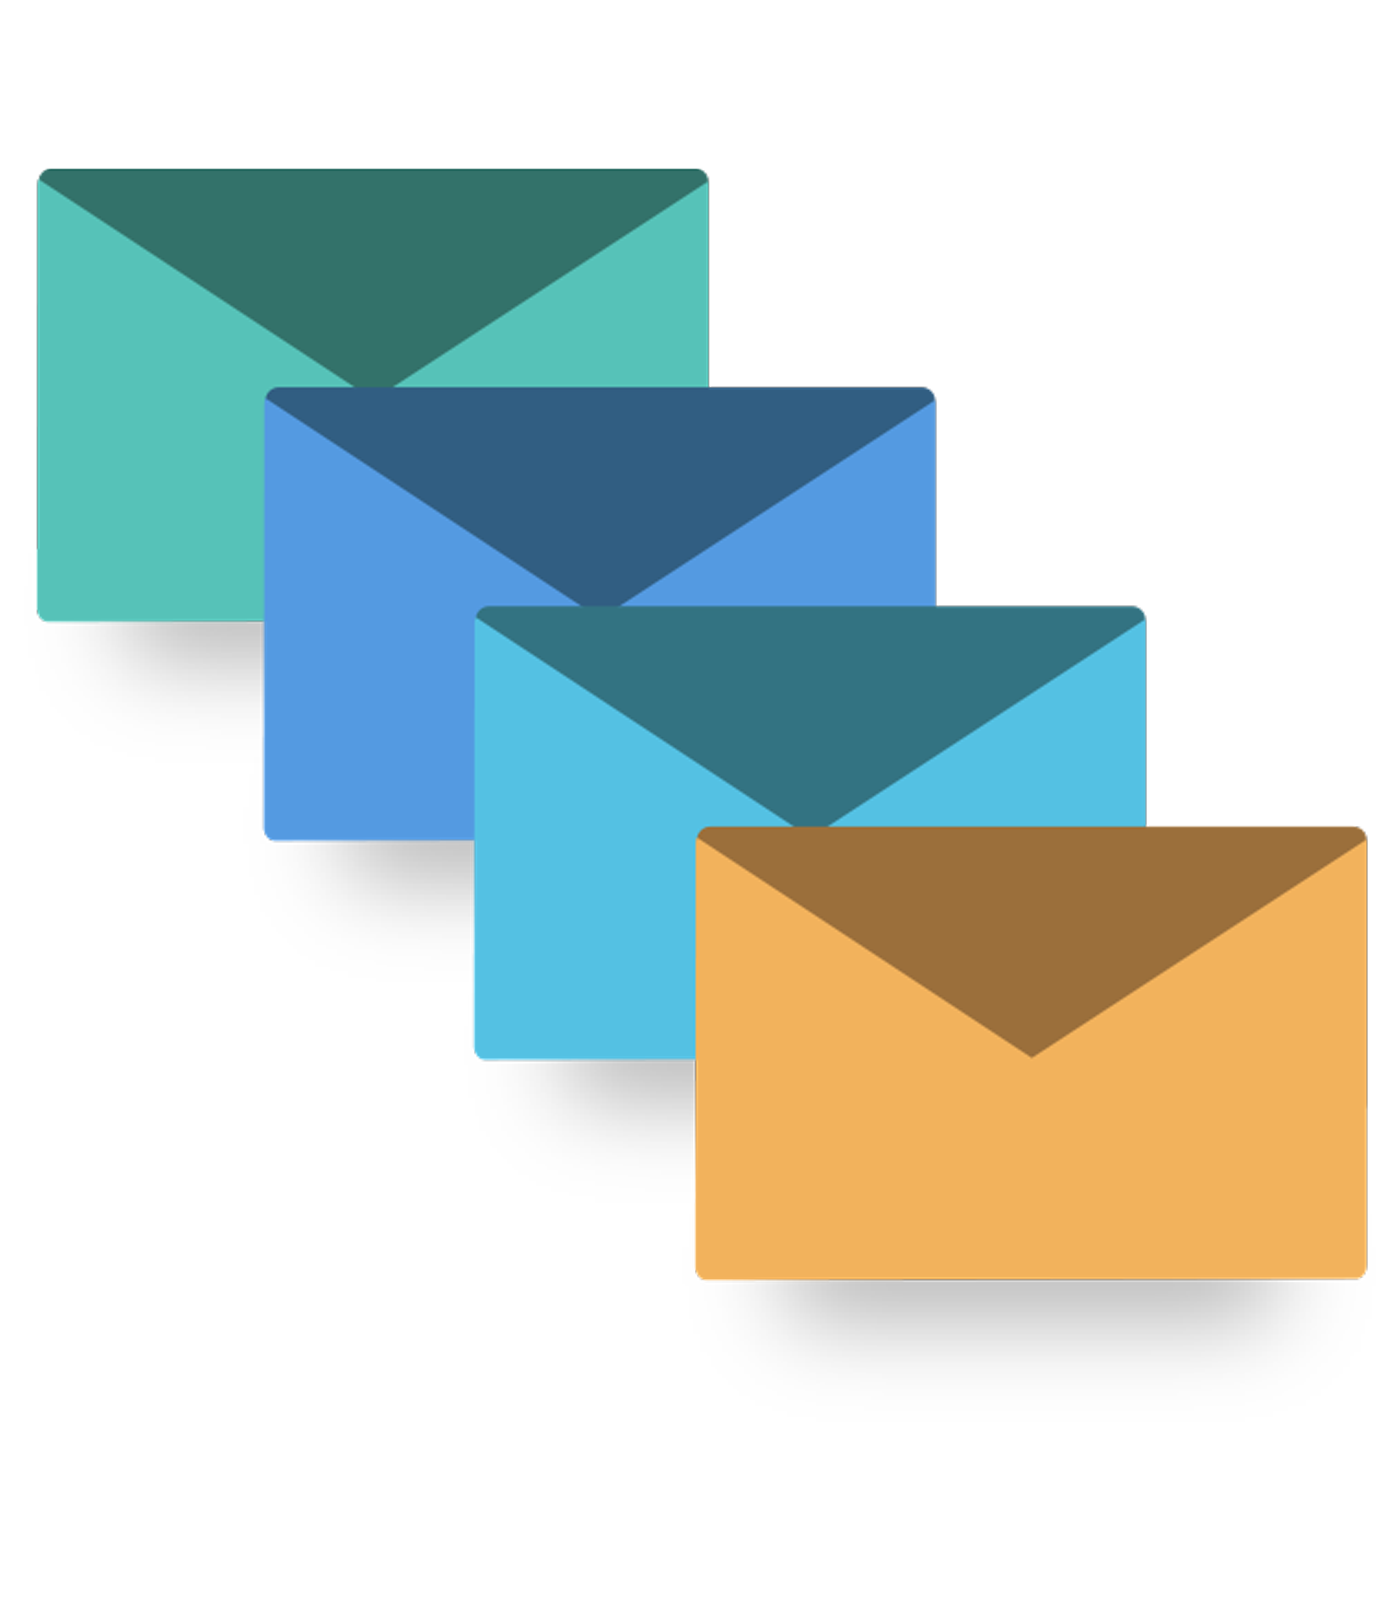 4 envelopes in different colors